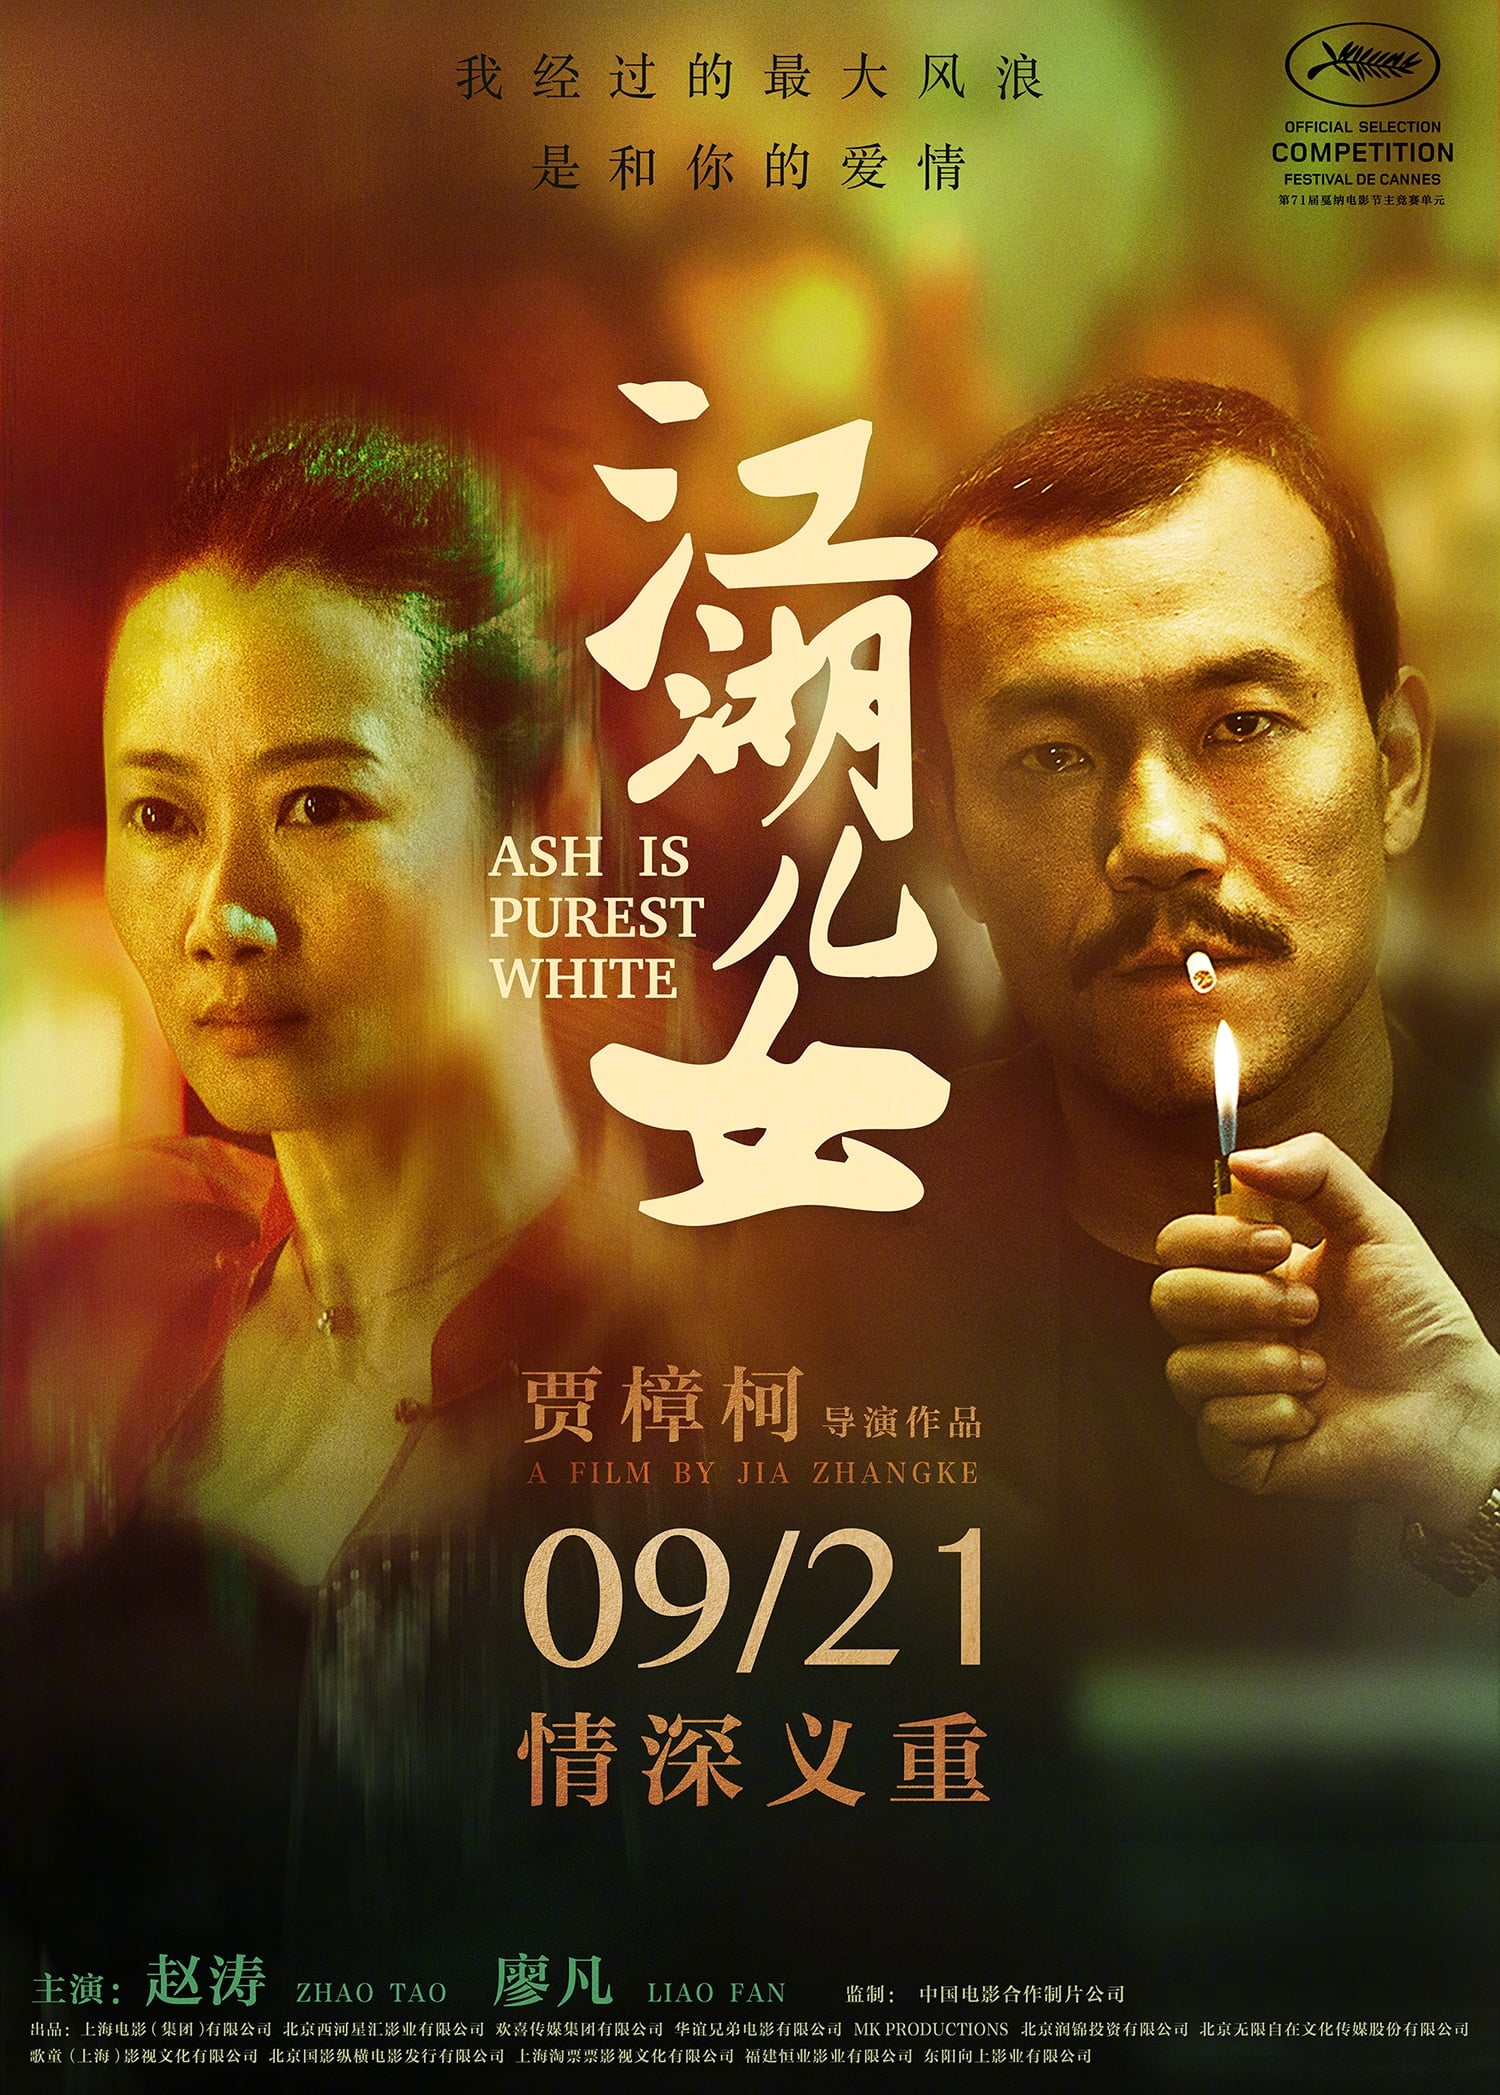 Giang Hồ Nữ Nhi (Ash is Purest White) [2018]